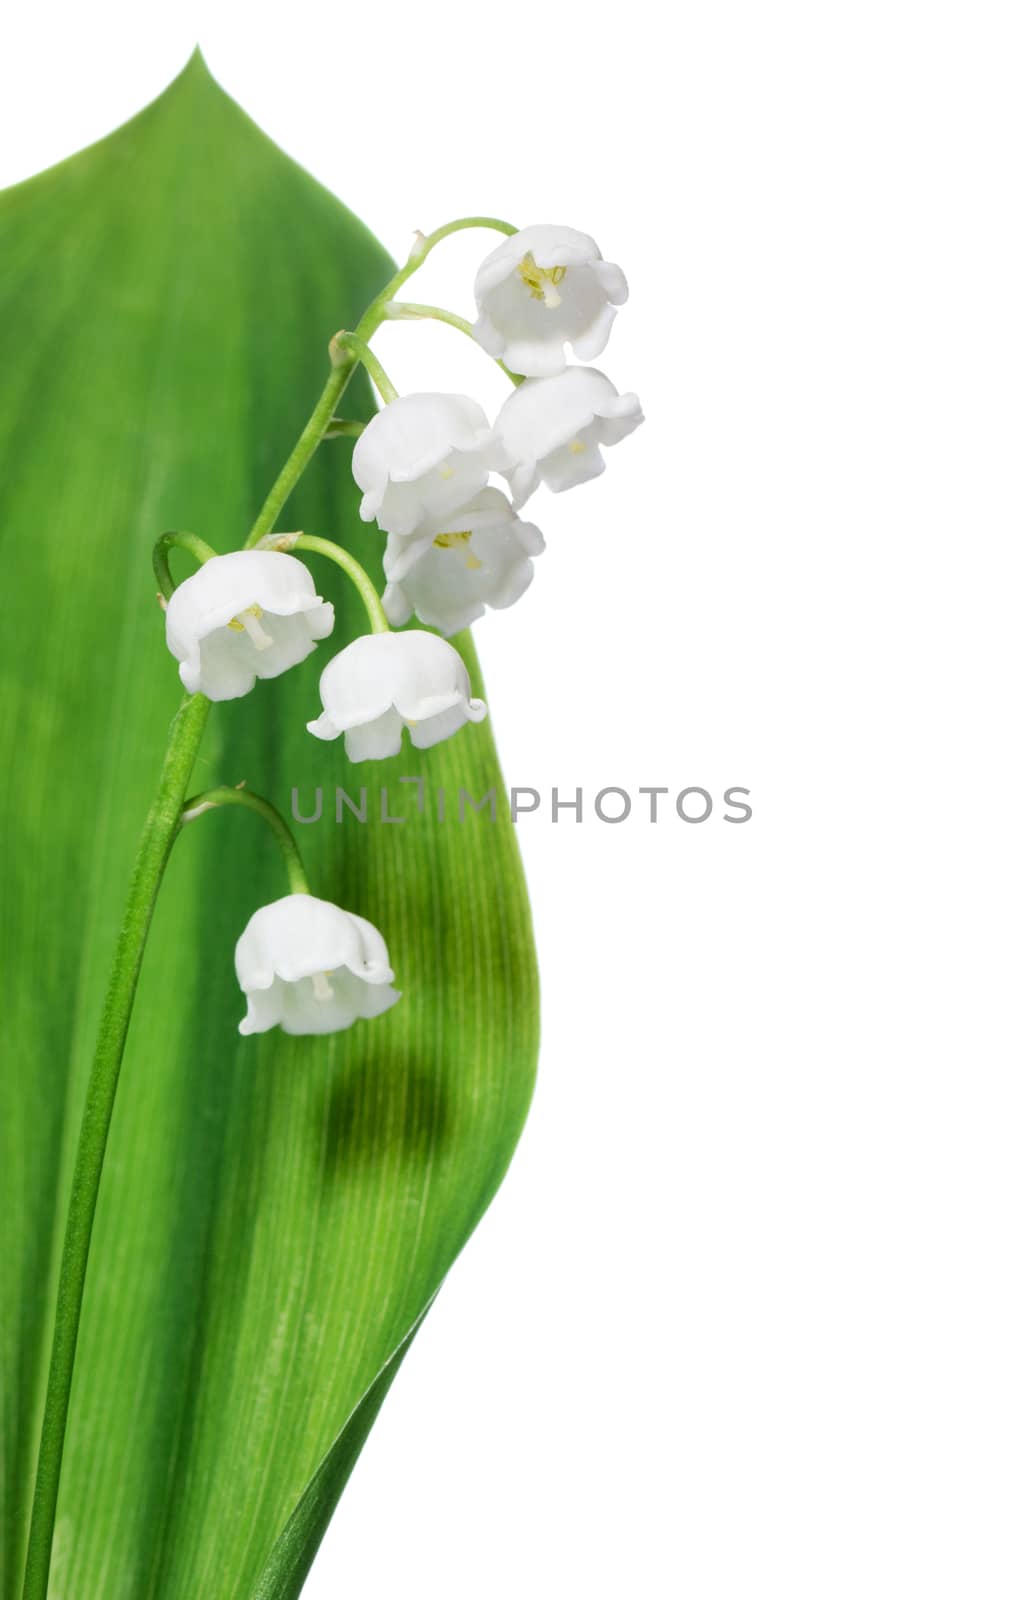 Lily of the valley by Valengilda